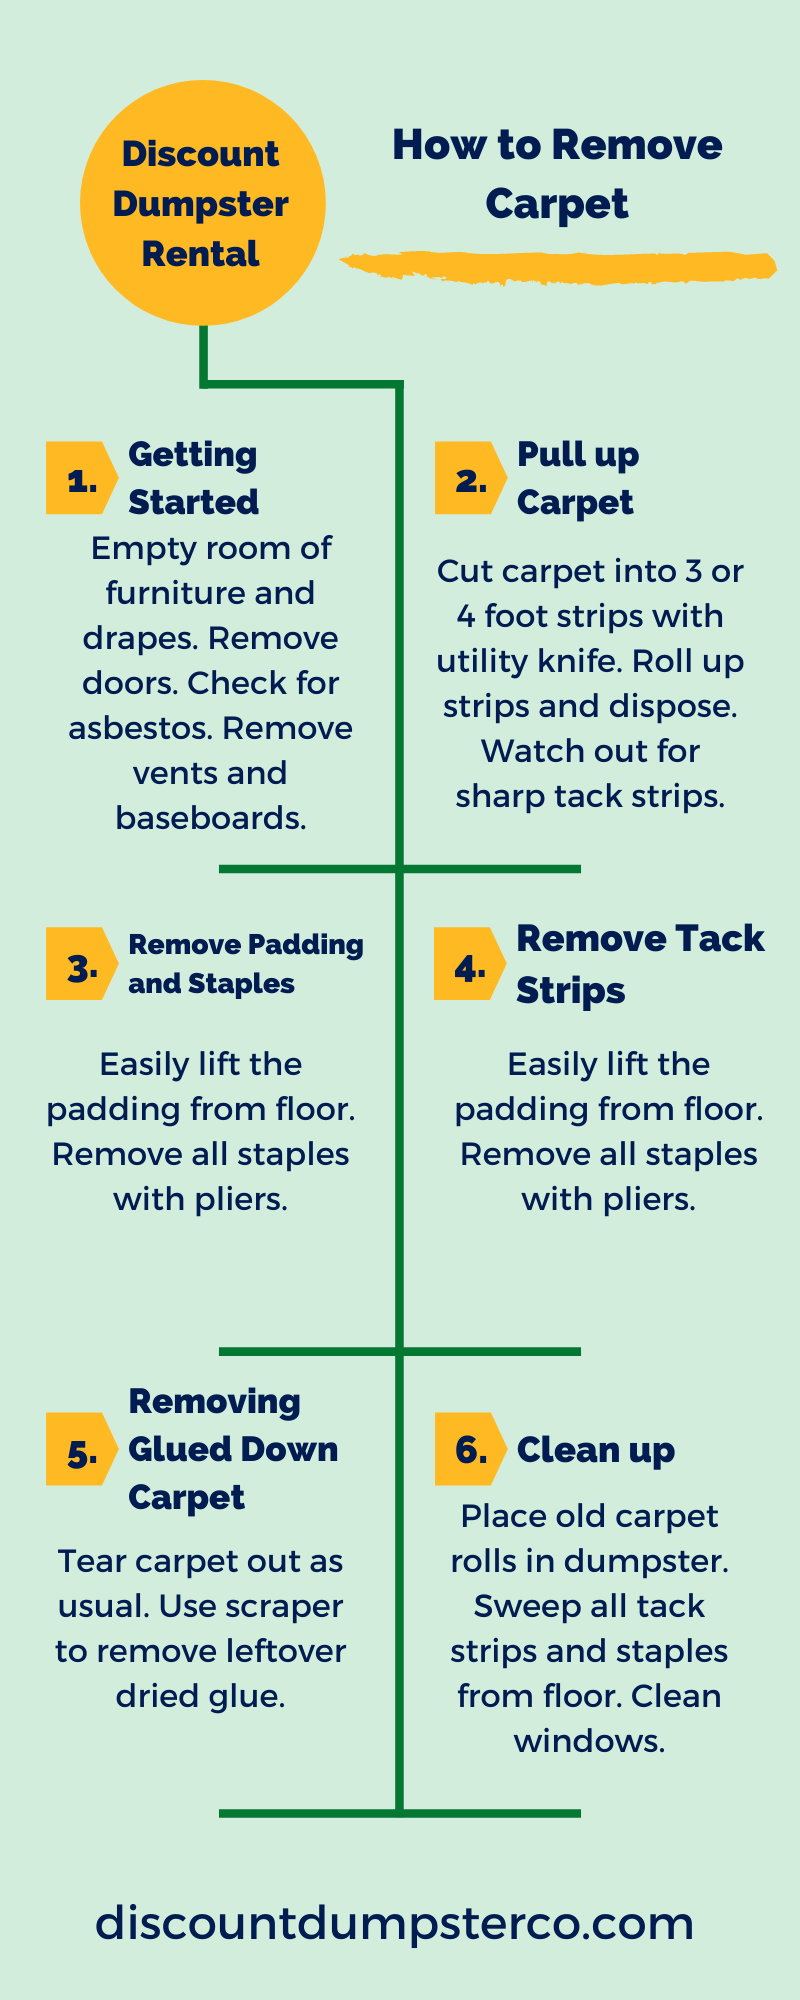 DIY: How to Remove and Dispose of Old Carpet